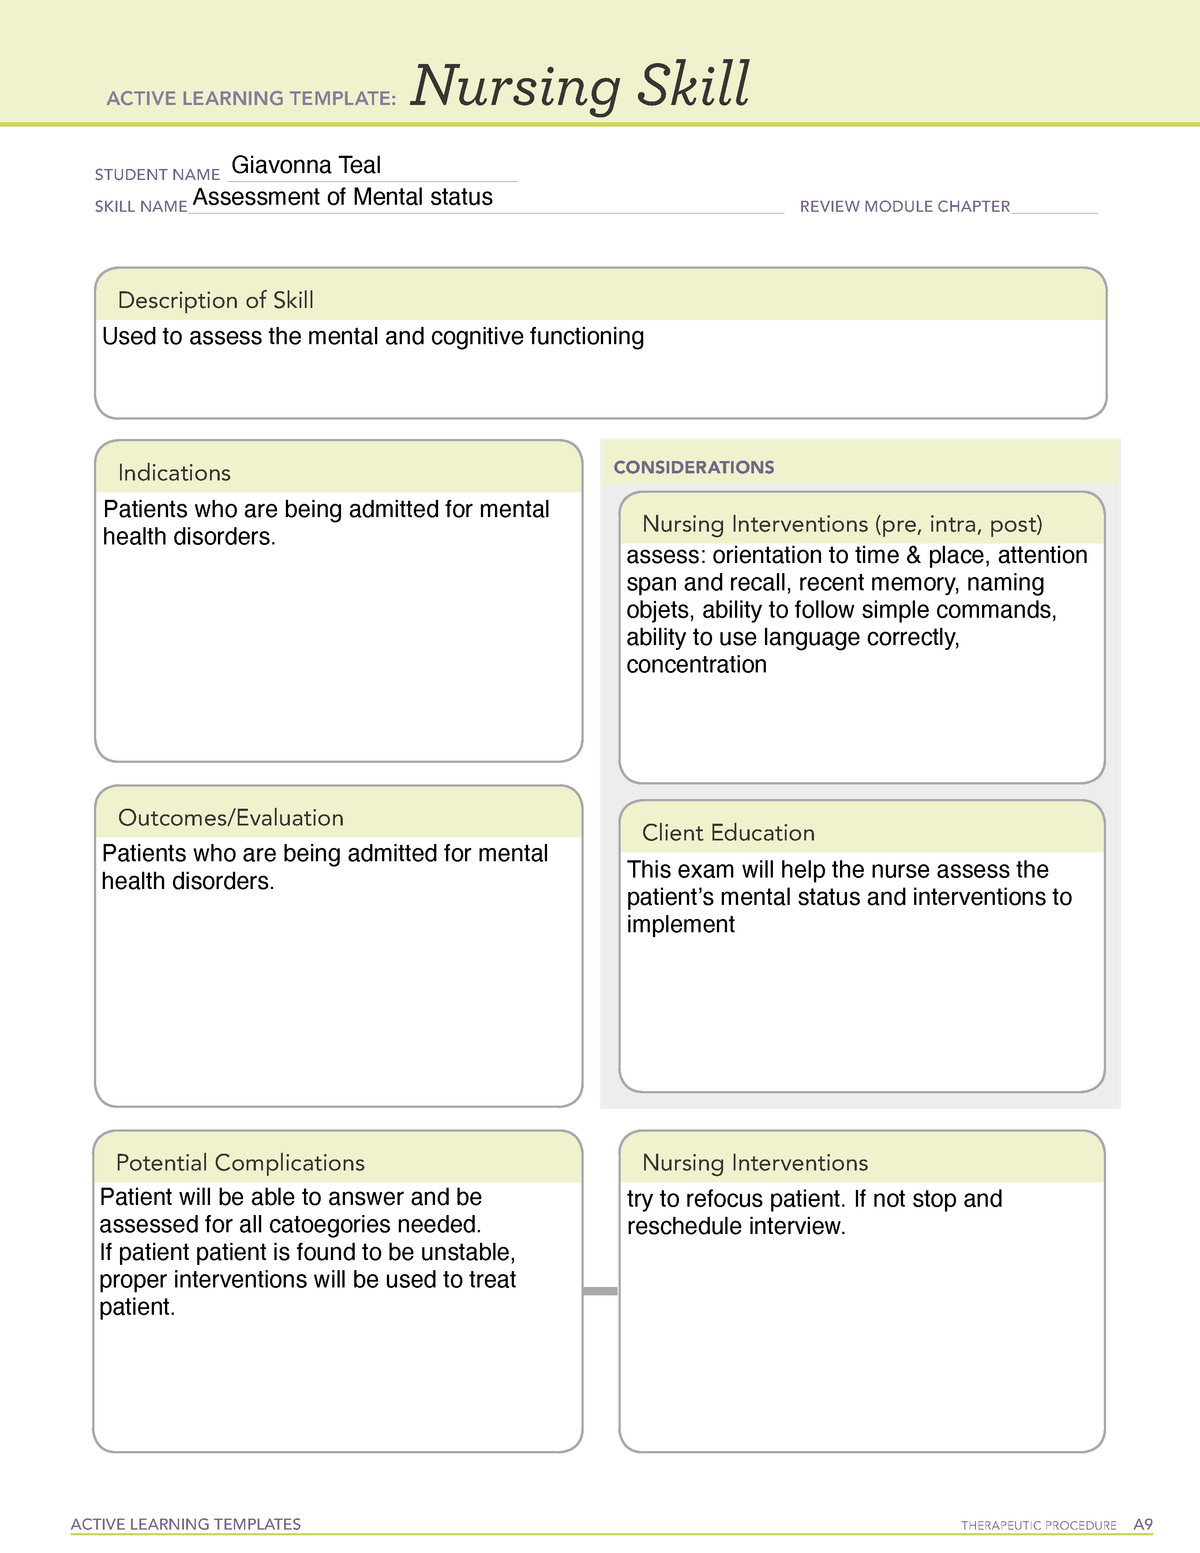 Assessment of mental status - ACTIVE LEARNING TEMPLATES THERAPEUTIC ...